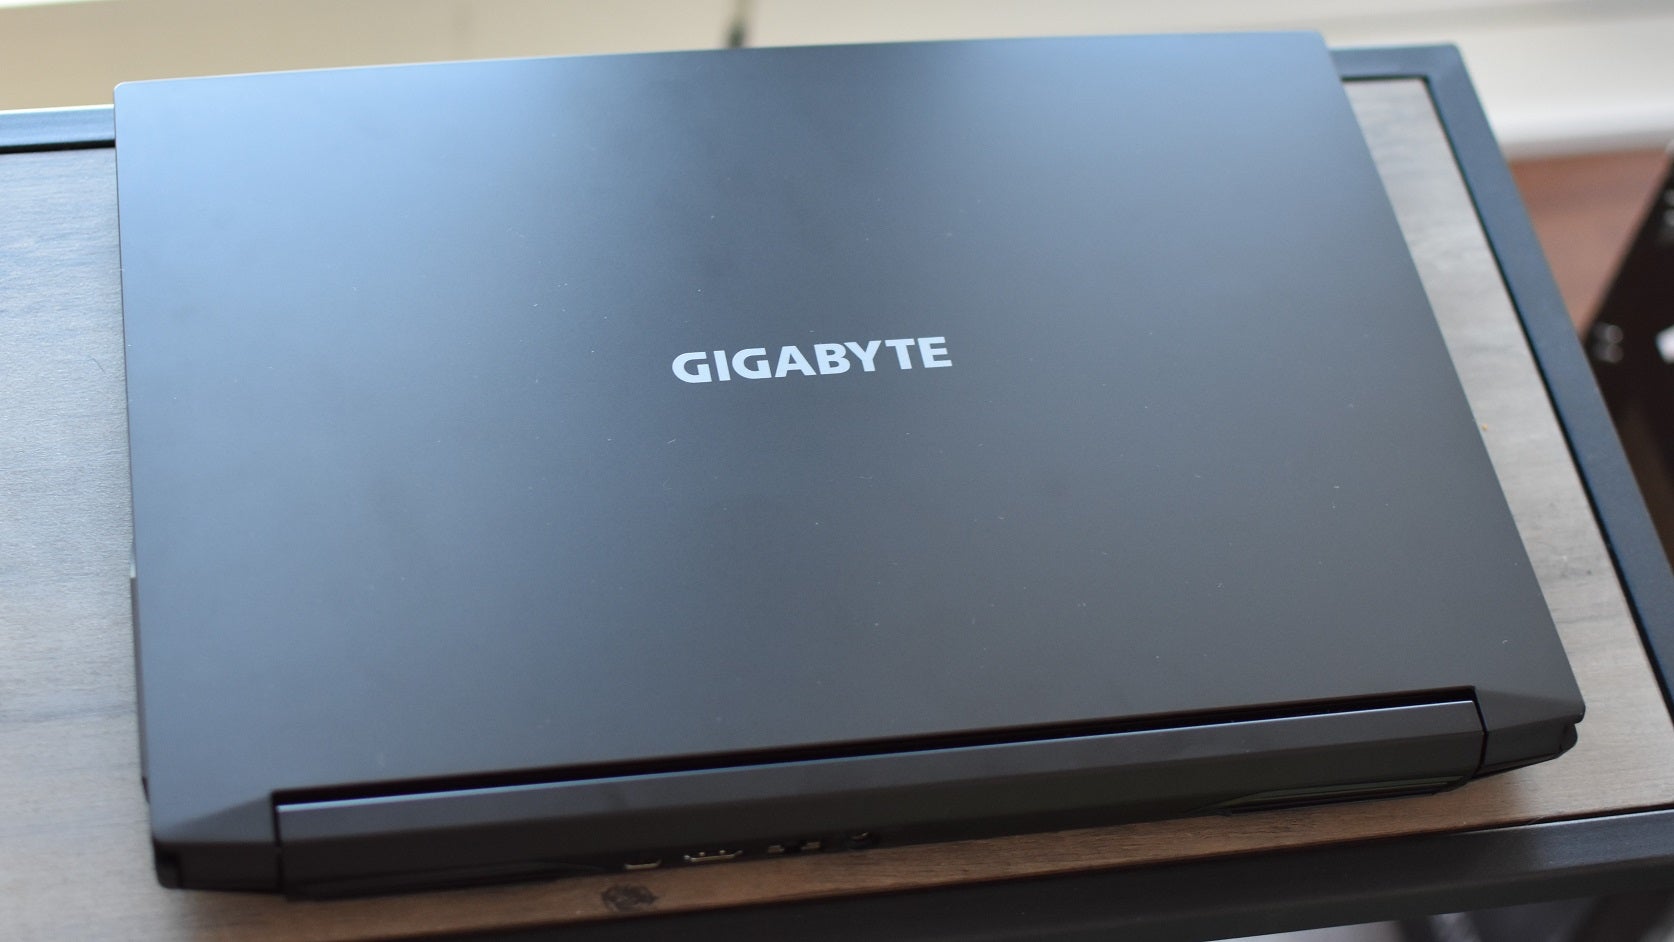 The Gigabyte G5 gaming laptop, sat on a small table with its lid shut.